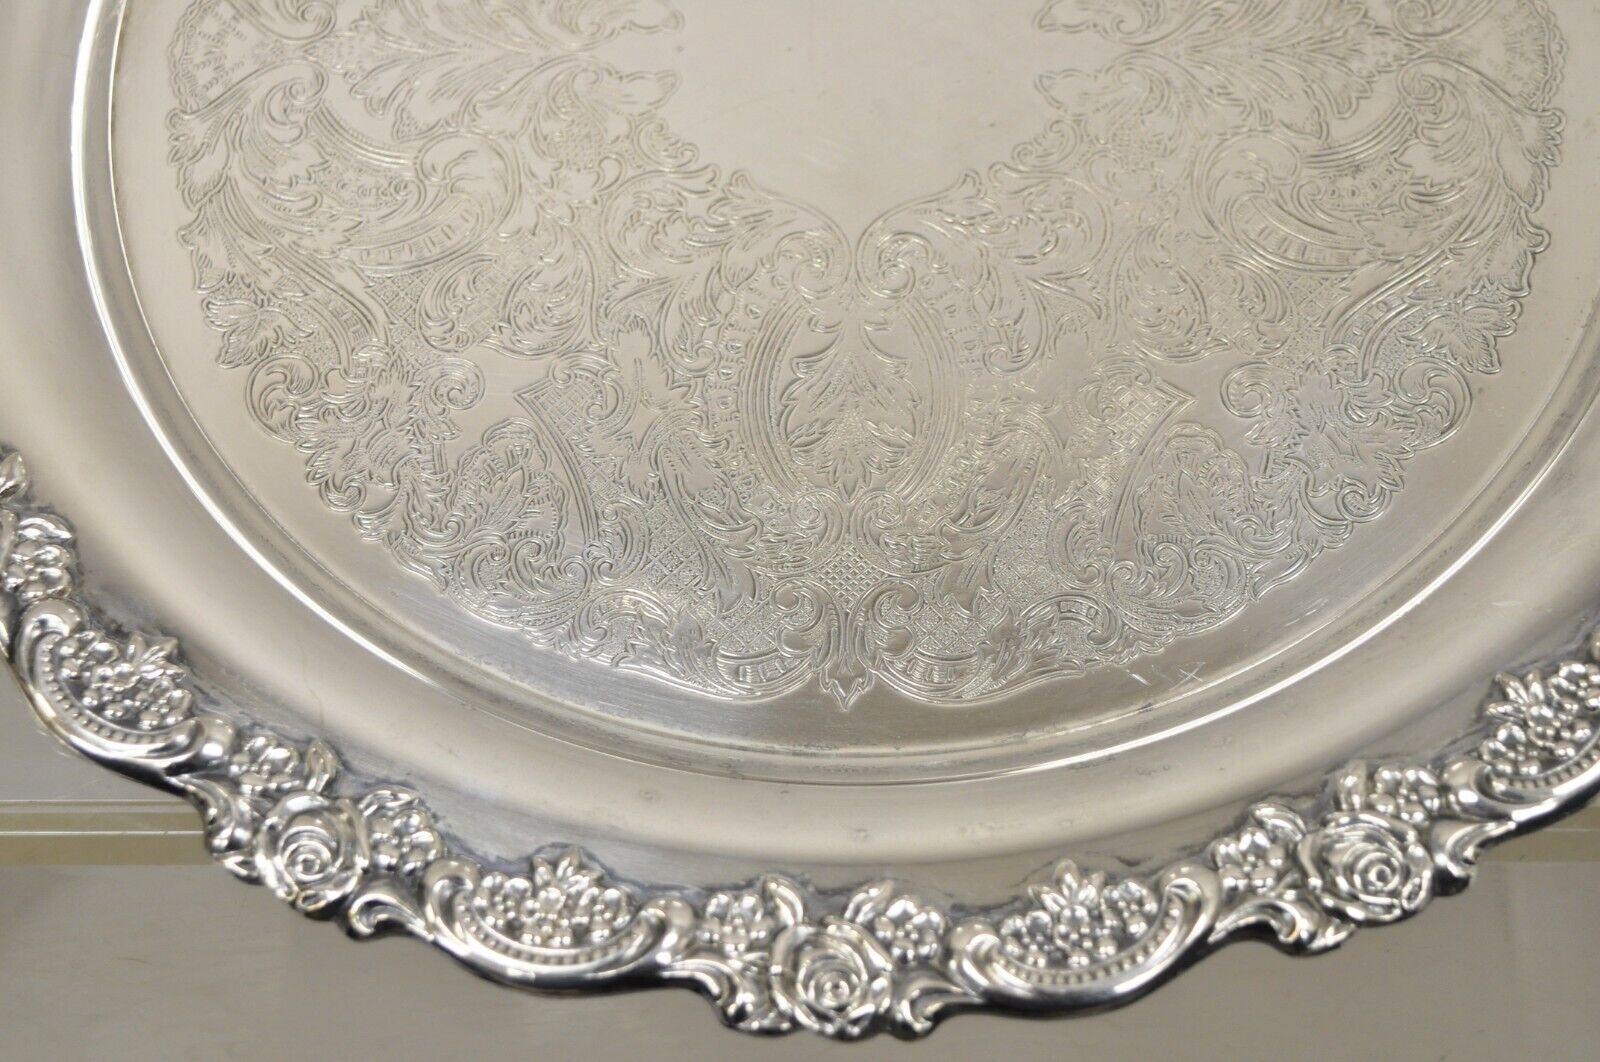 Vtg Oneida Victorian Style Round Silver Plated Serving Platter Tray w handles In Good Condition For Sale In Philadelphia, PA